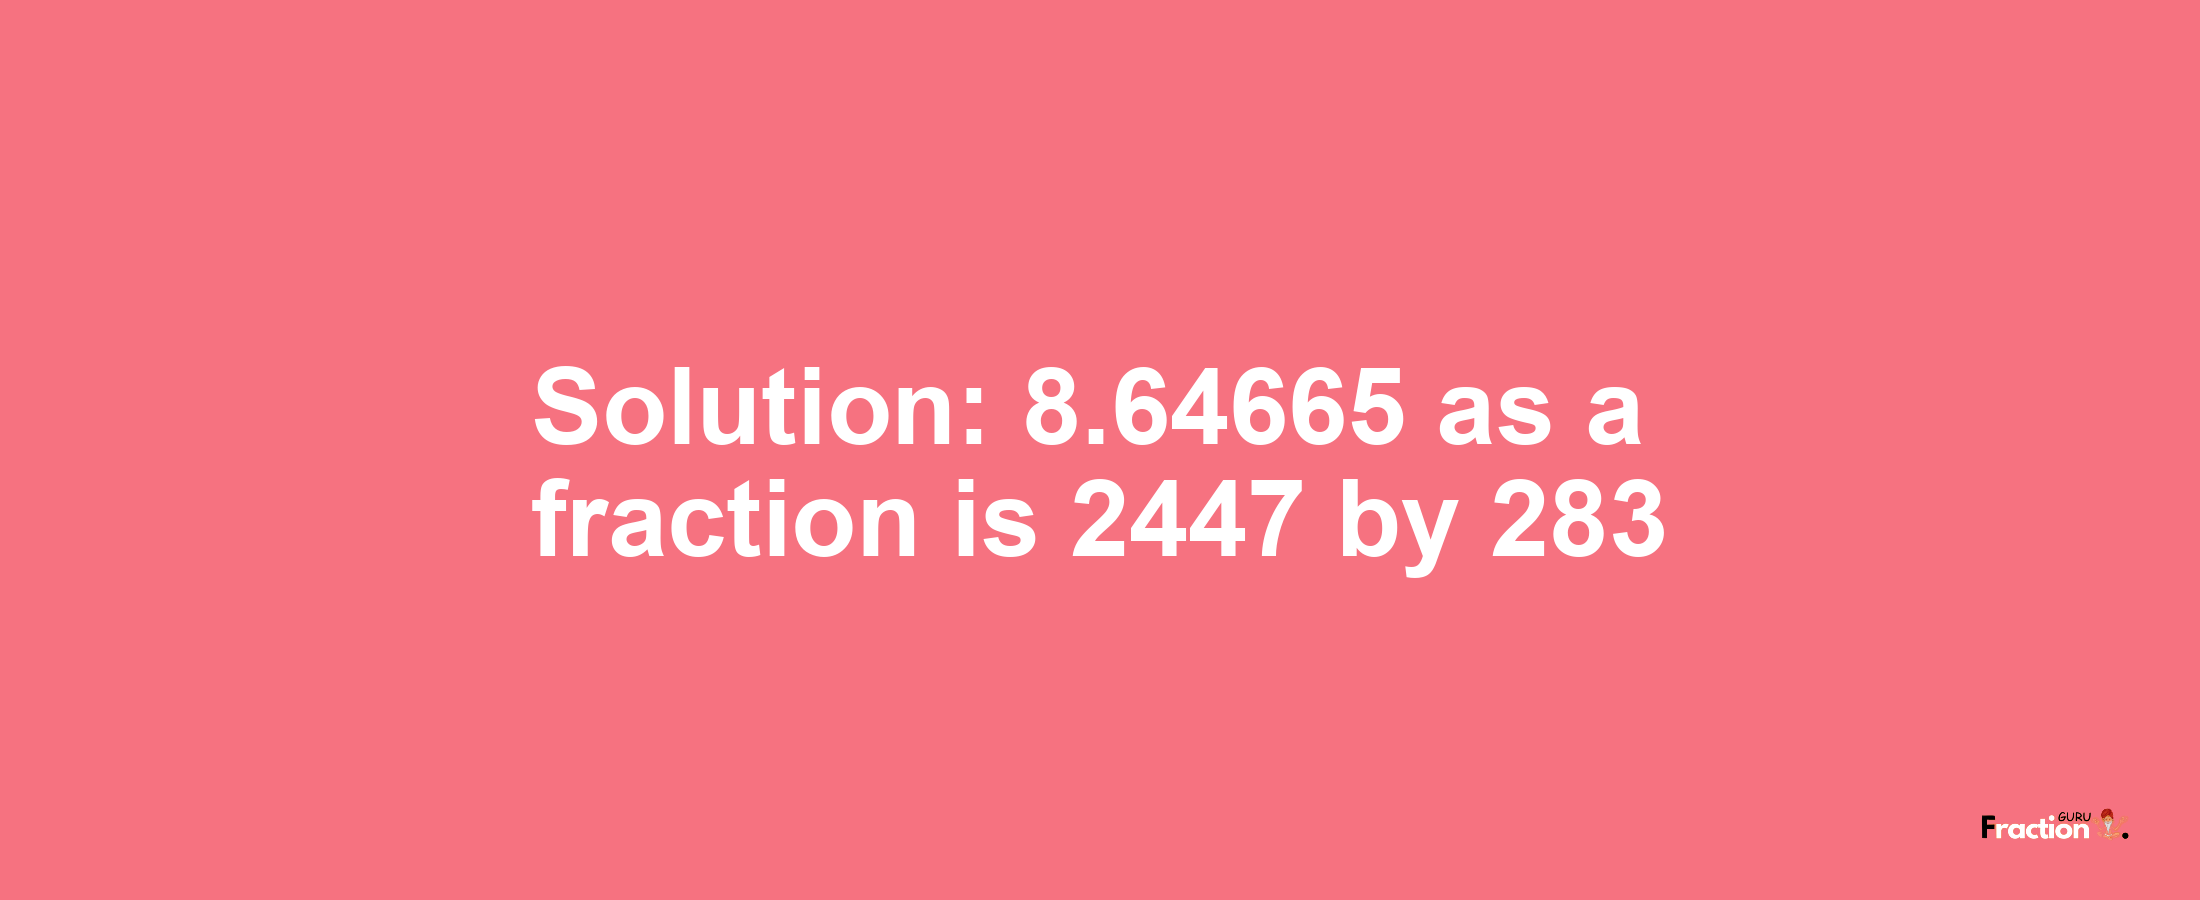 Solution:8.64665 as a fraction is 2447/283